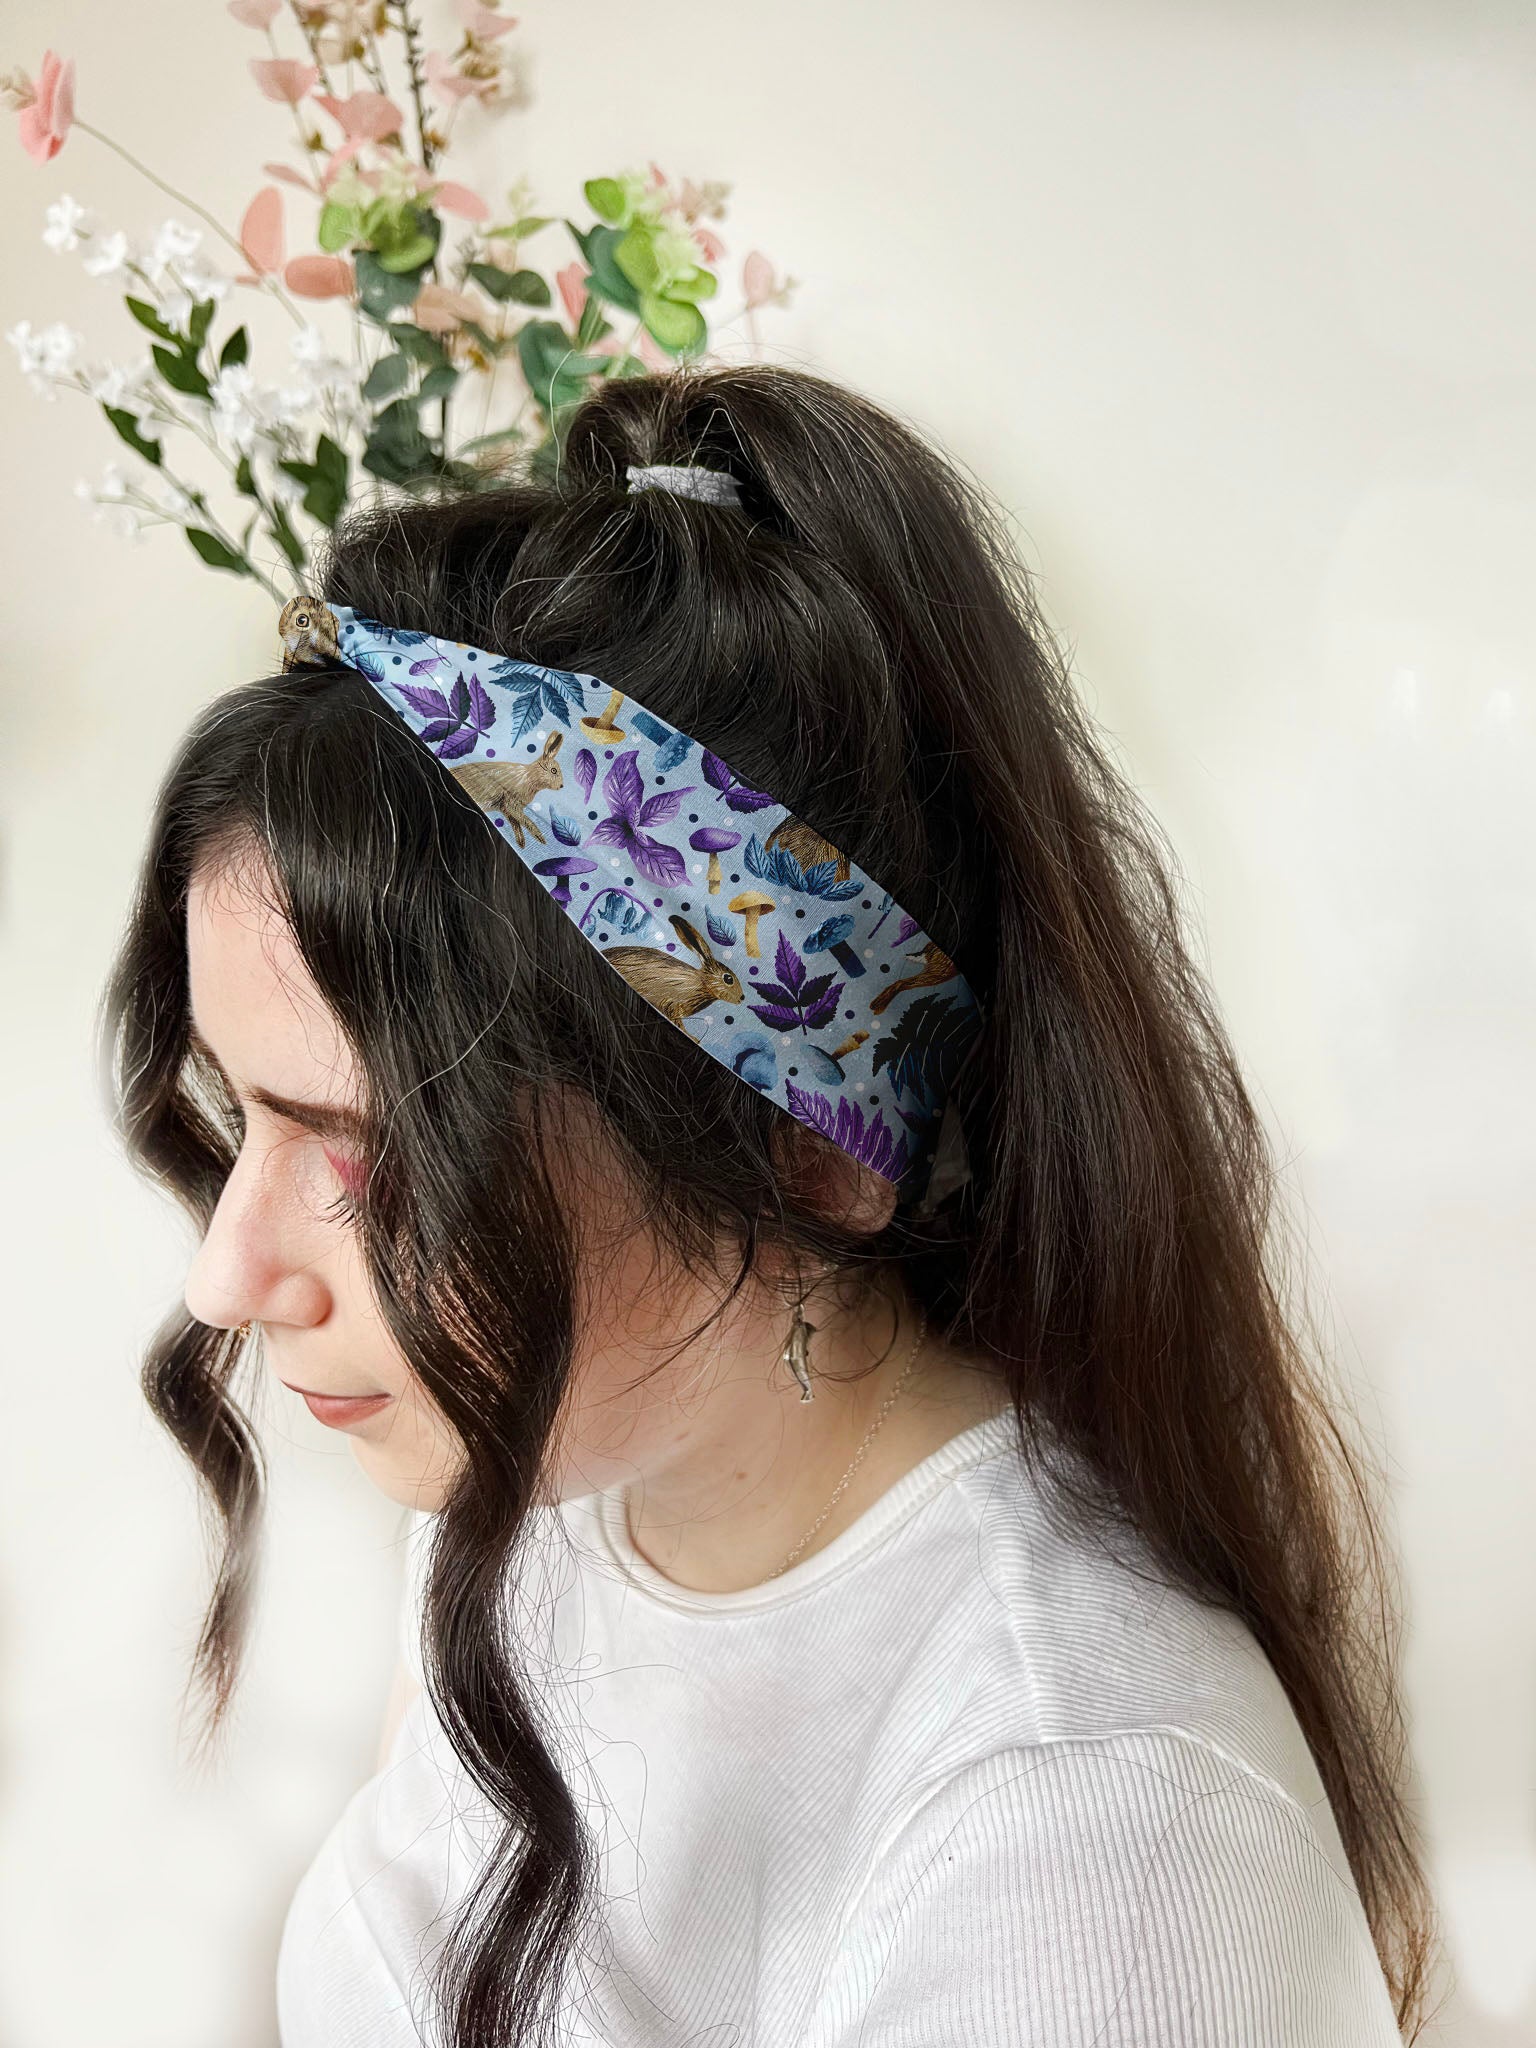 dark haired girl wears headband with hare surface pattern design